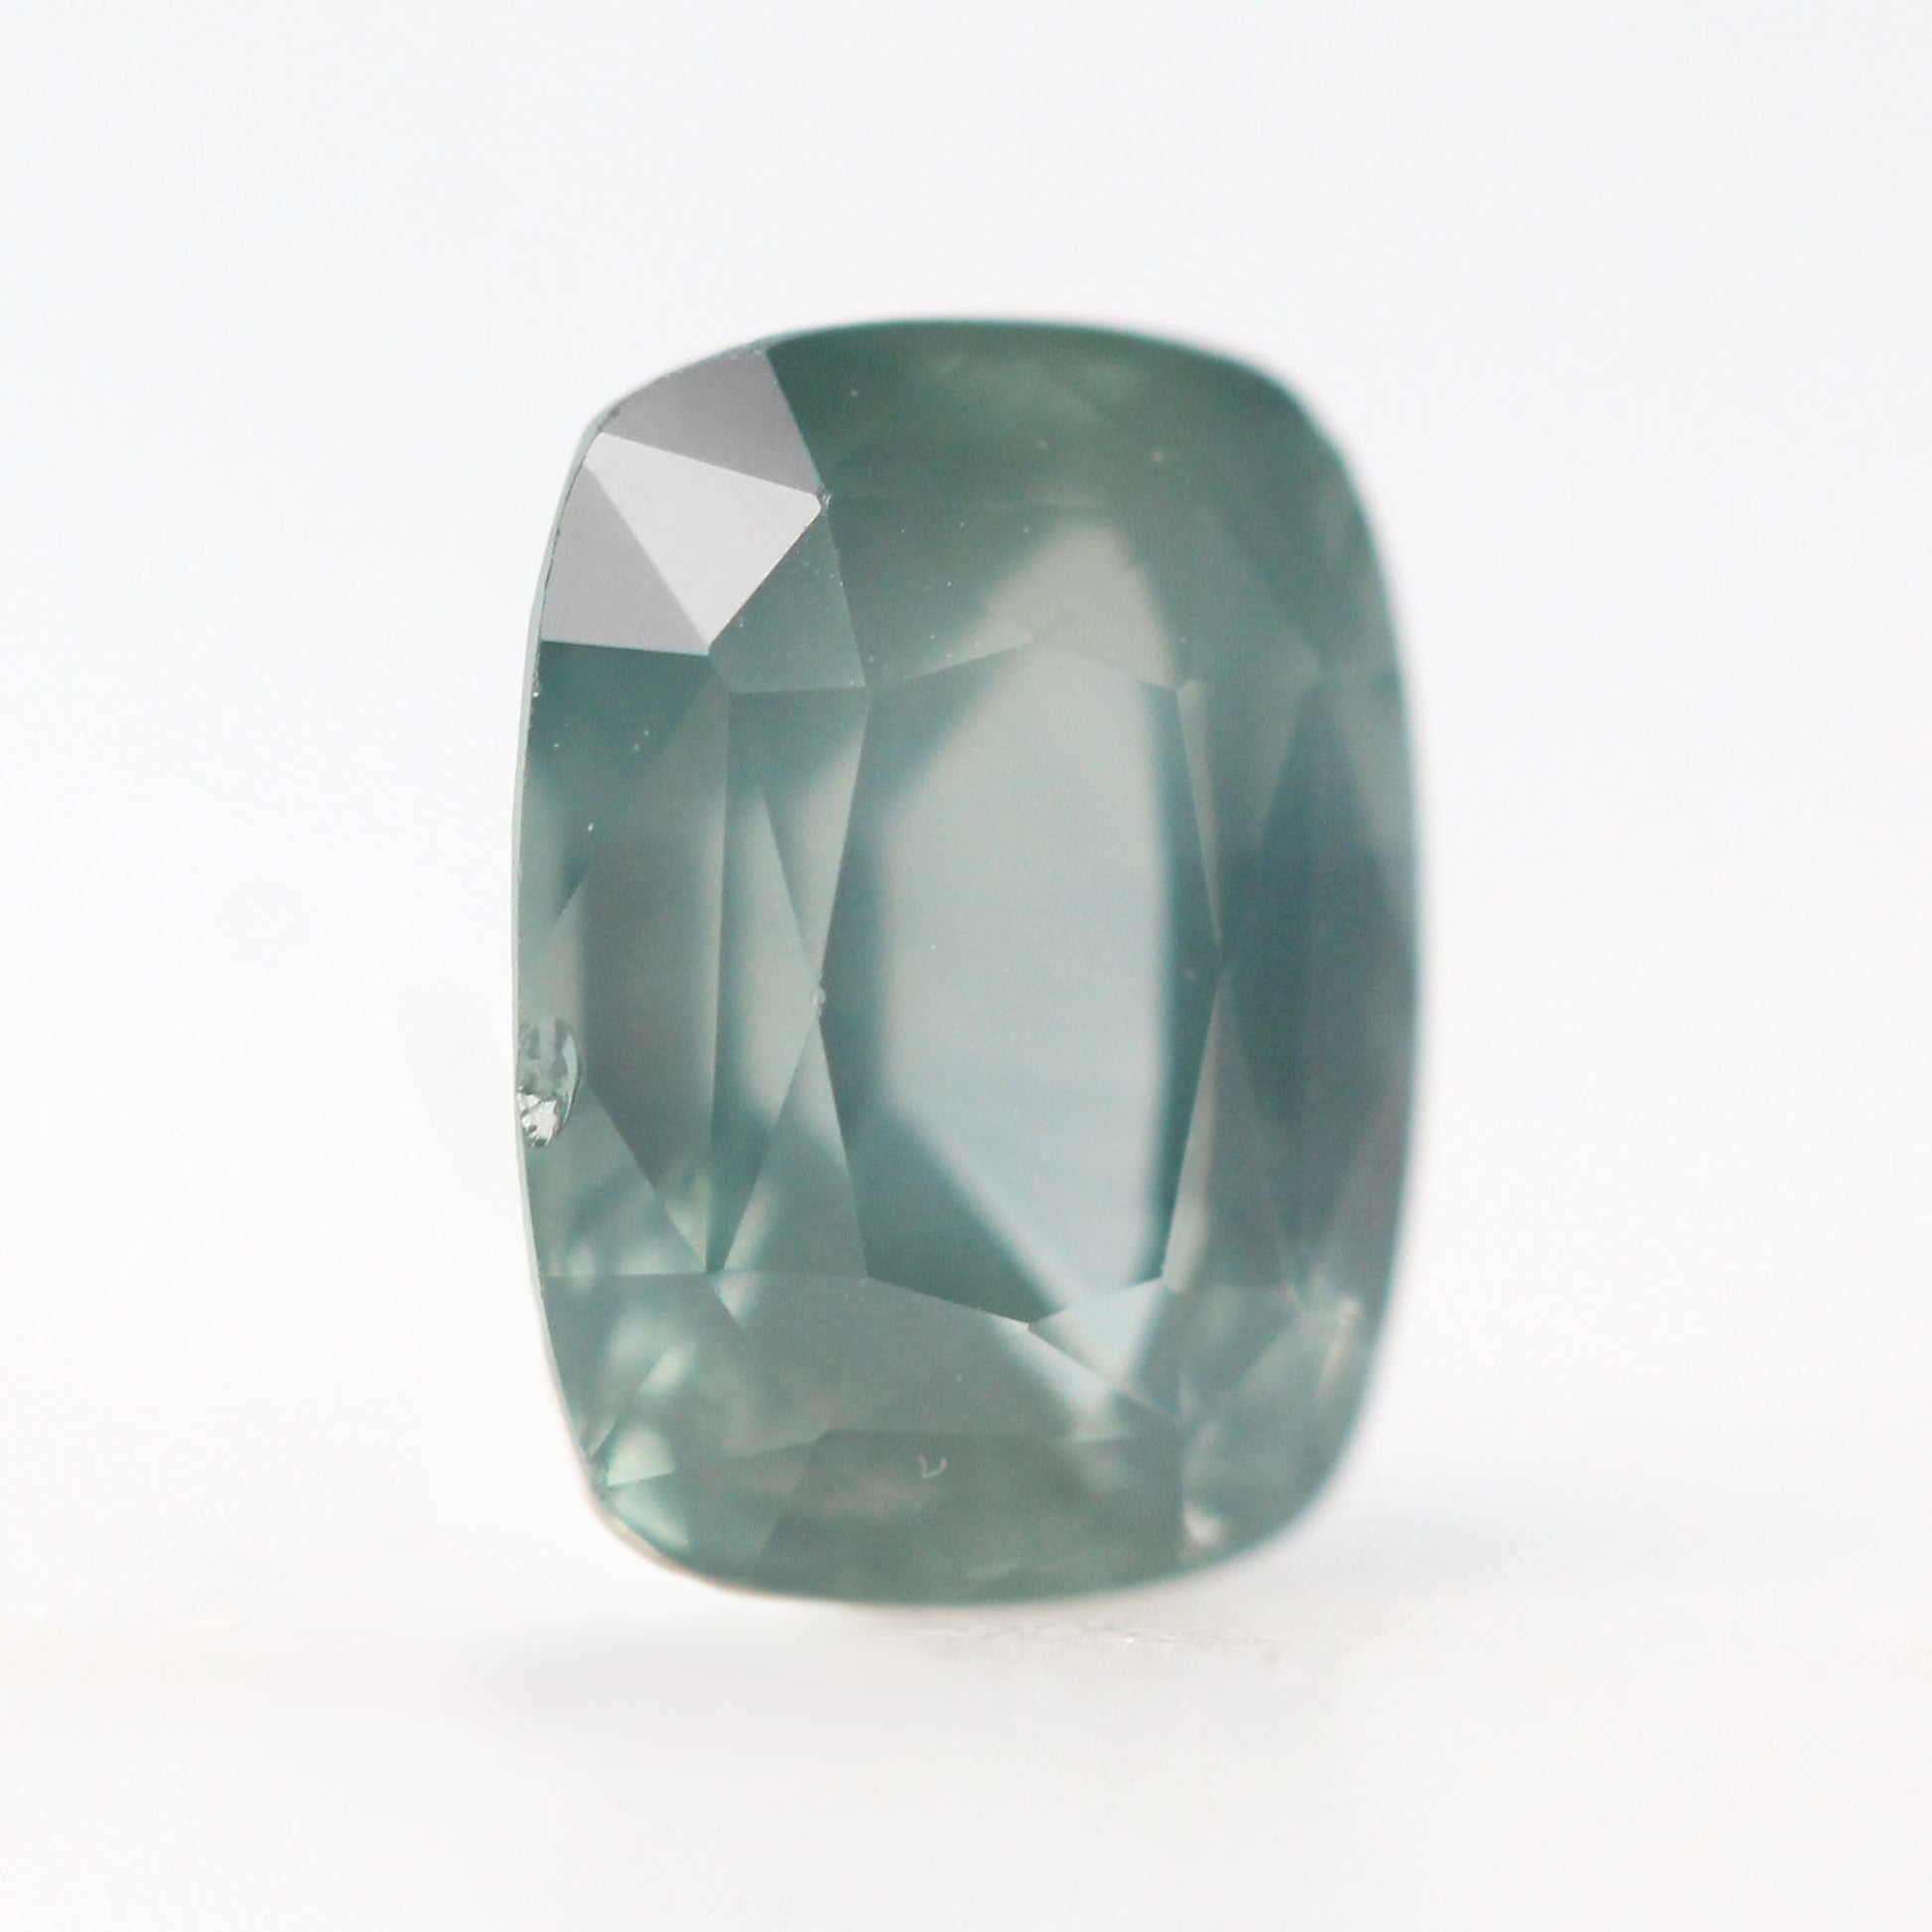 1.61 Carat Light Teal Elongated Cushion Sapphire for Custom Work - Inventory Code ECTS161 - Midwinter Co. Alternative Bridal Rings and Modern Fine Jewelry